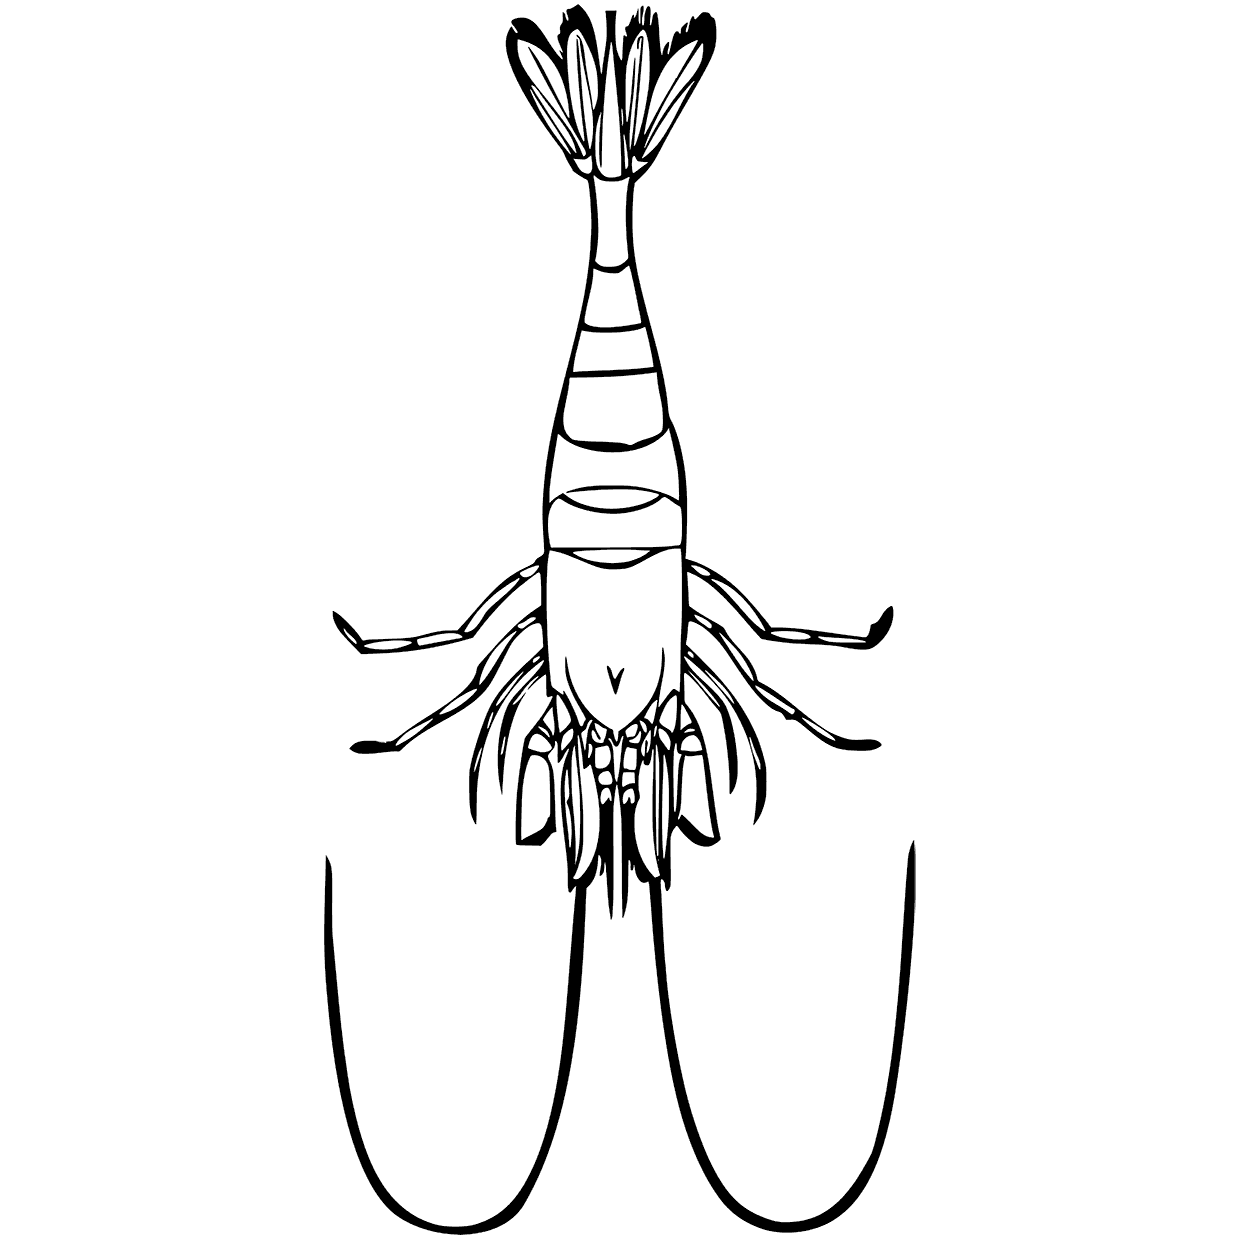 Shrimp Easy Image Coloring Page